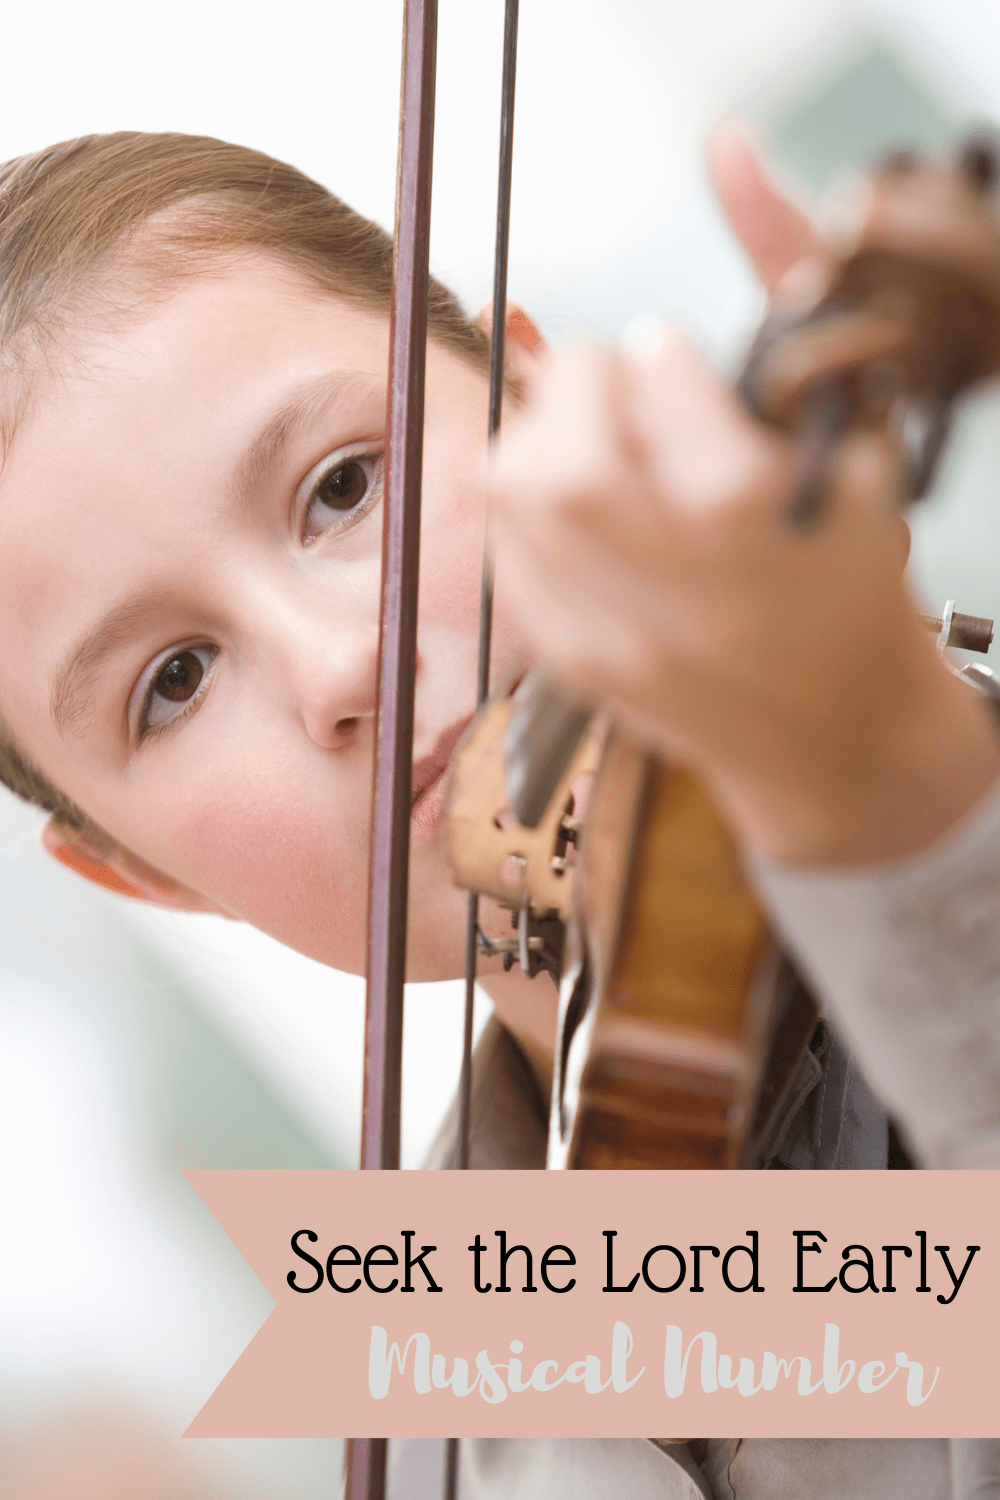 Seek the Lord Early Musical Number Easy ideas for Music Leaders Seek Lord Early Musical Number